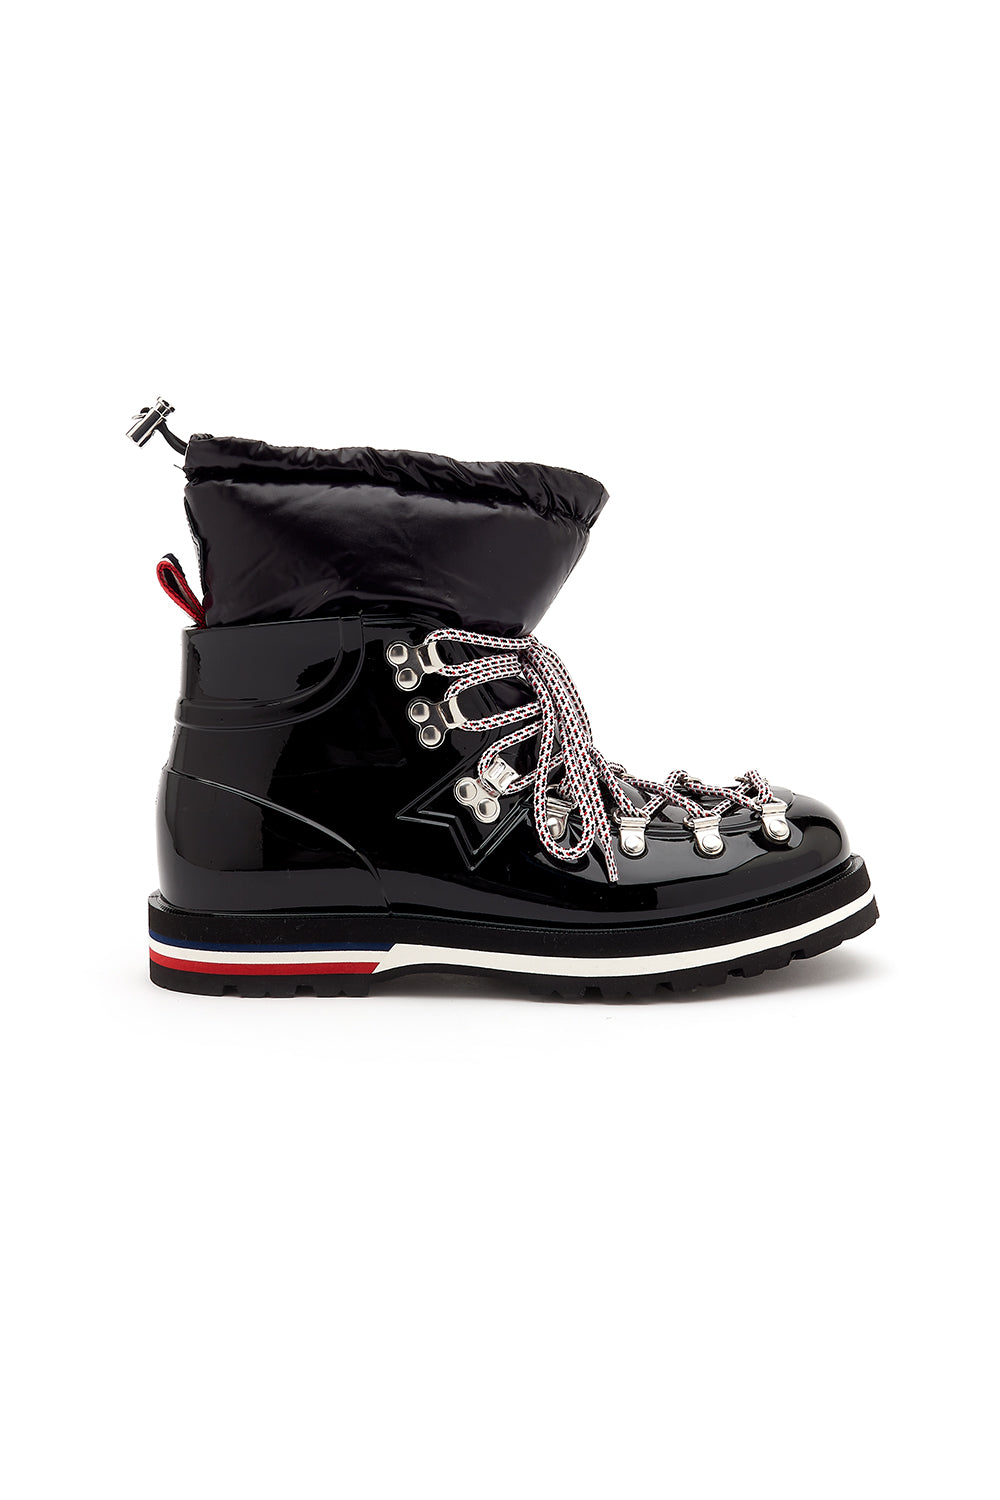 Moncler Inaya Women's Rubber and Down Ankle Boots Black - Side View